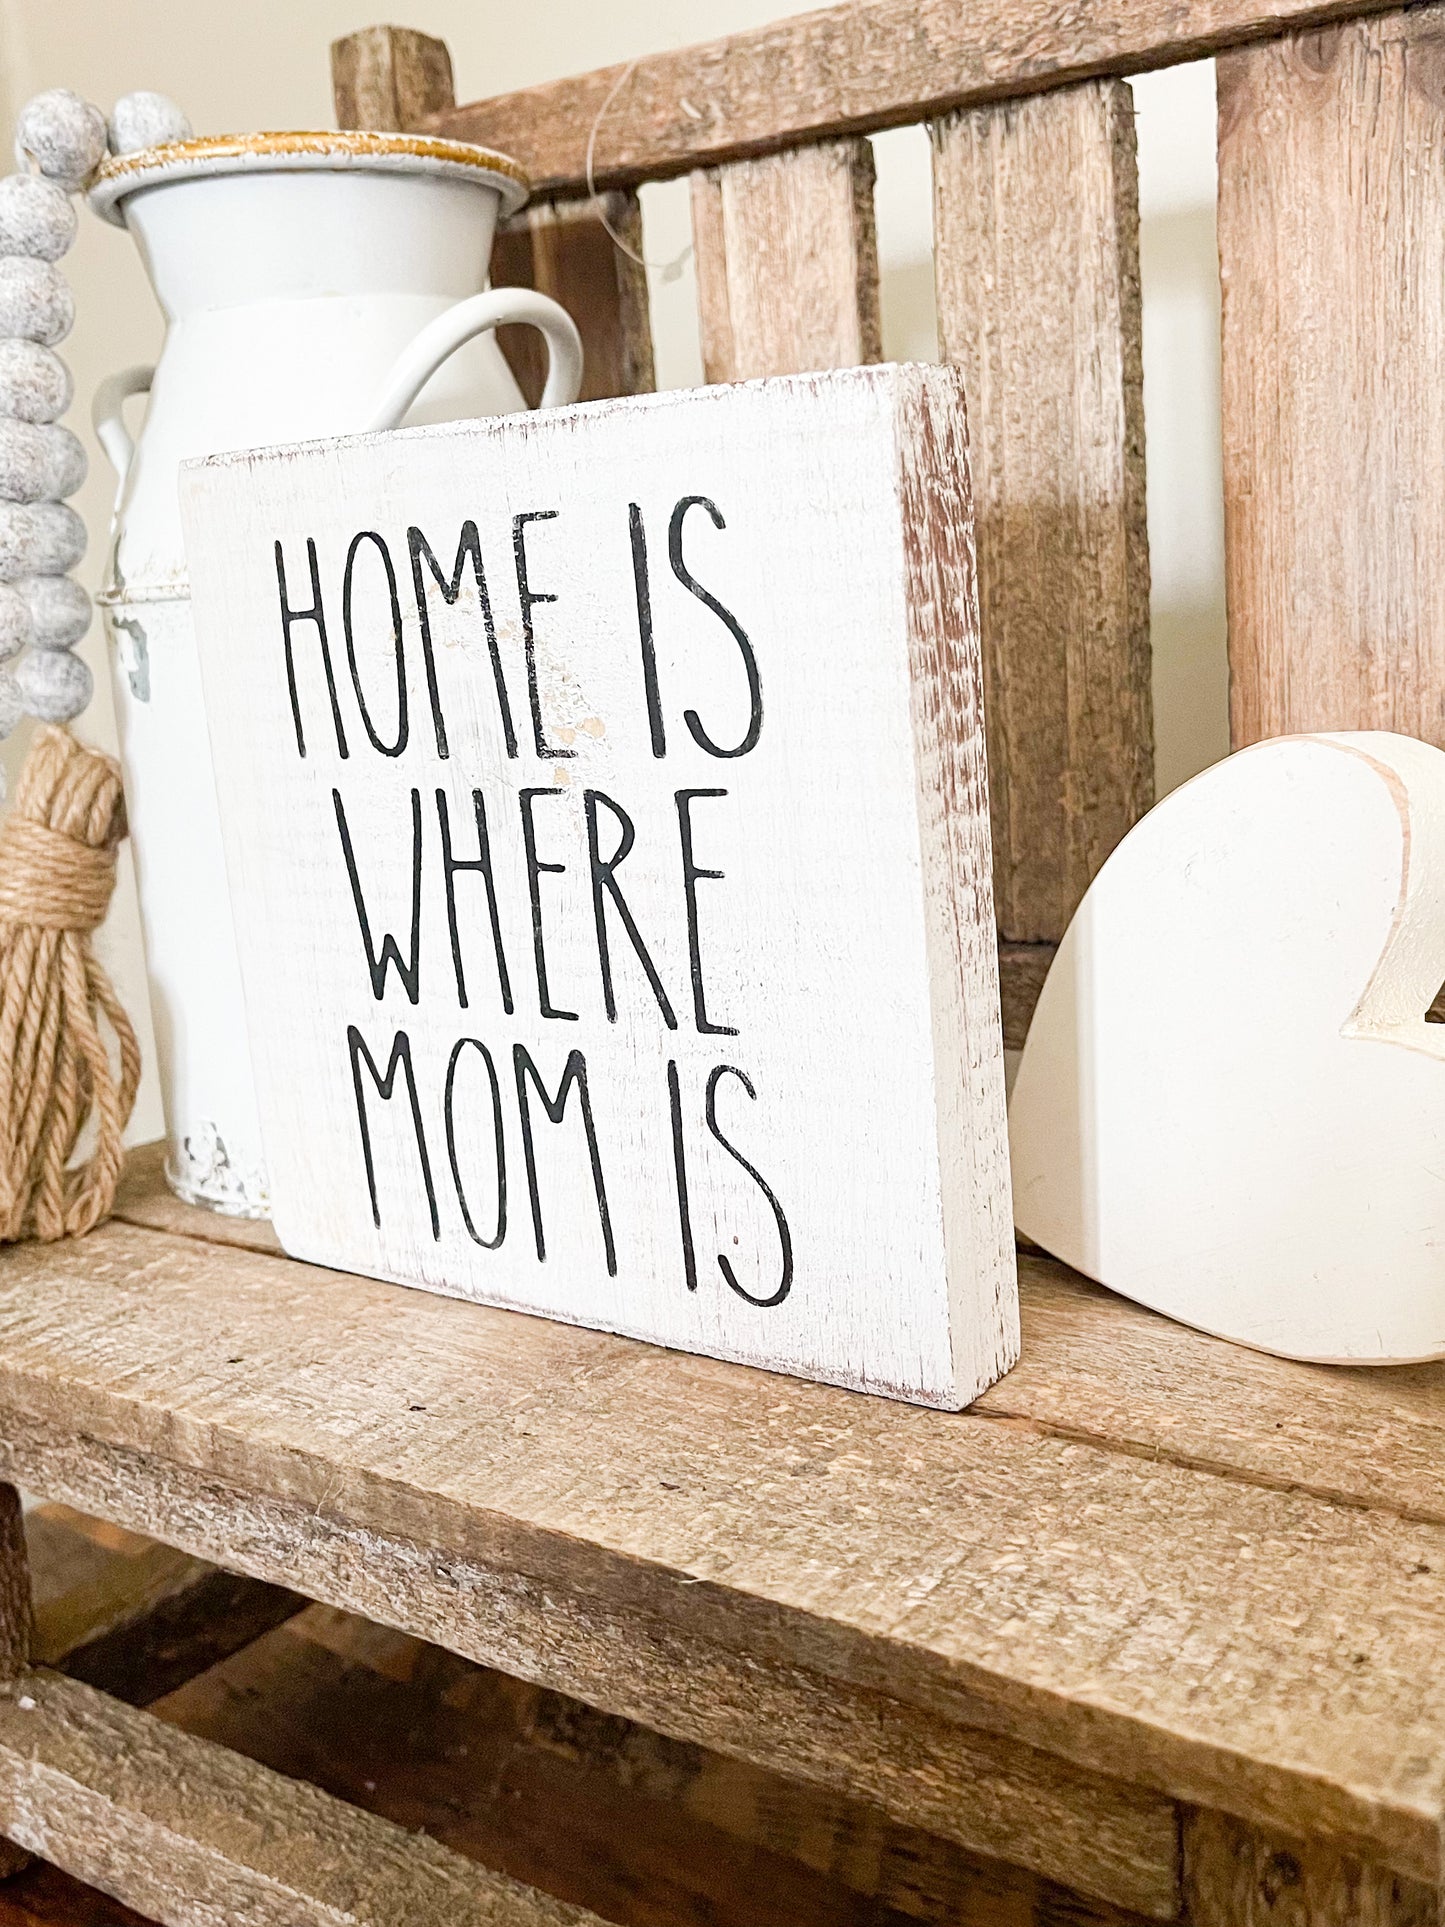 Home is where mom is sign